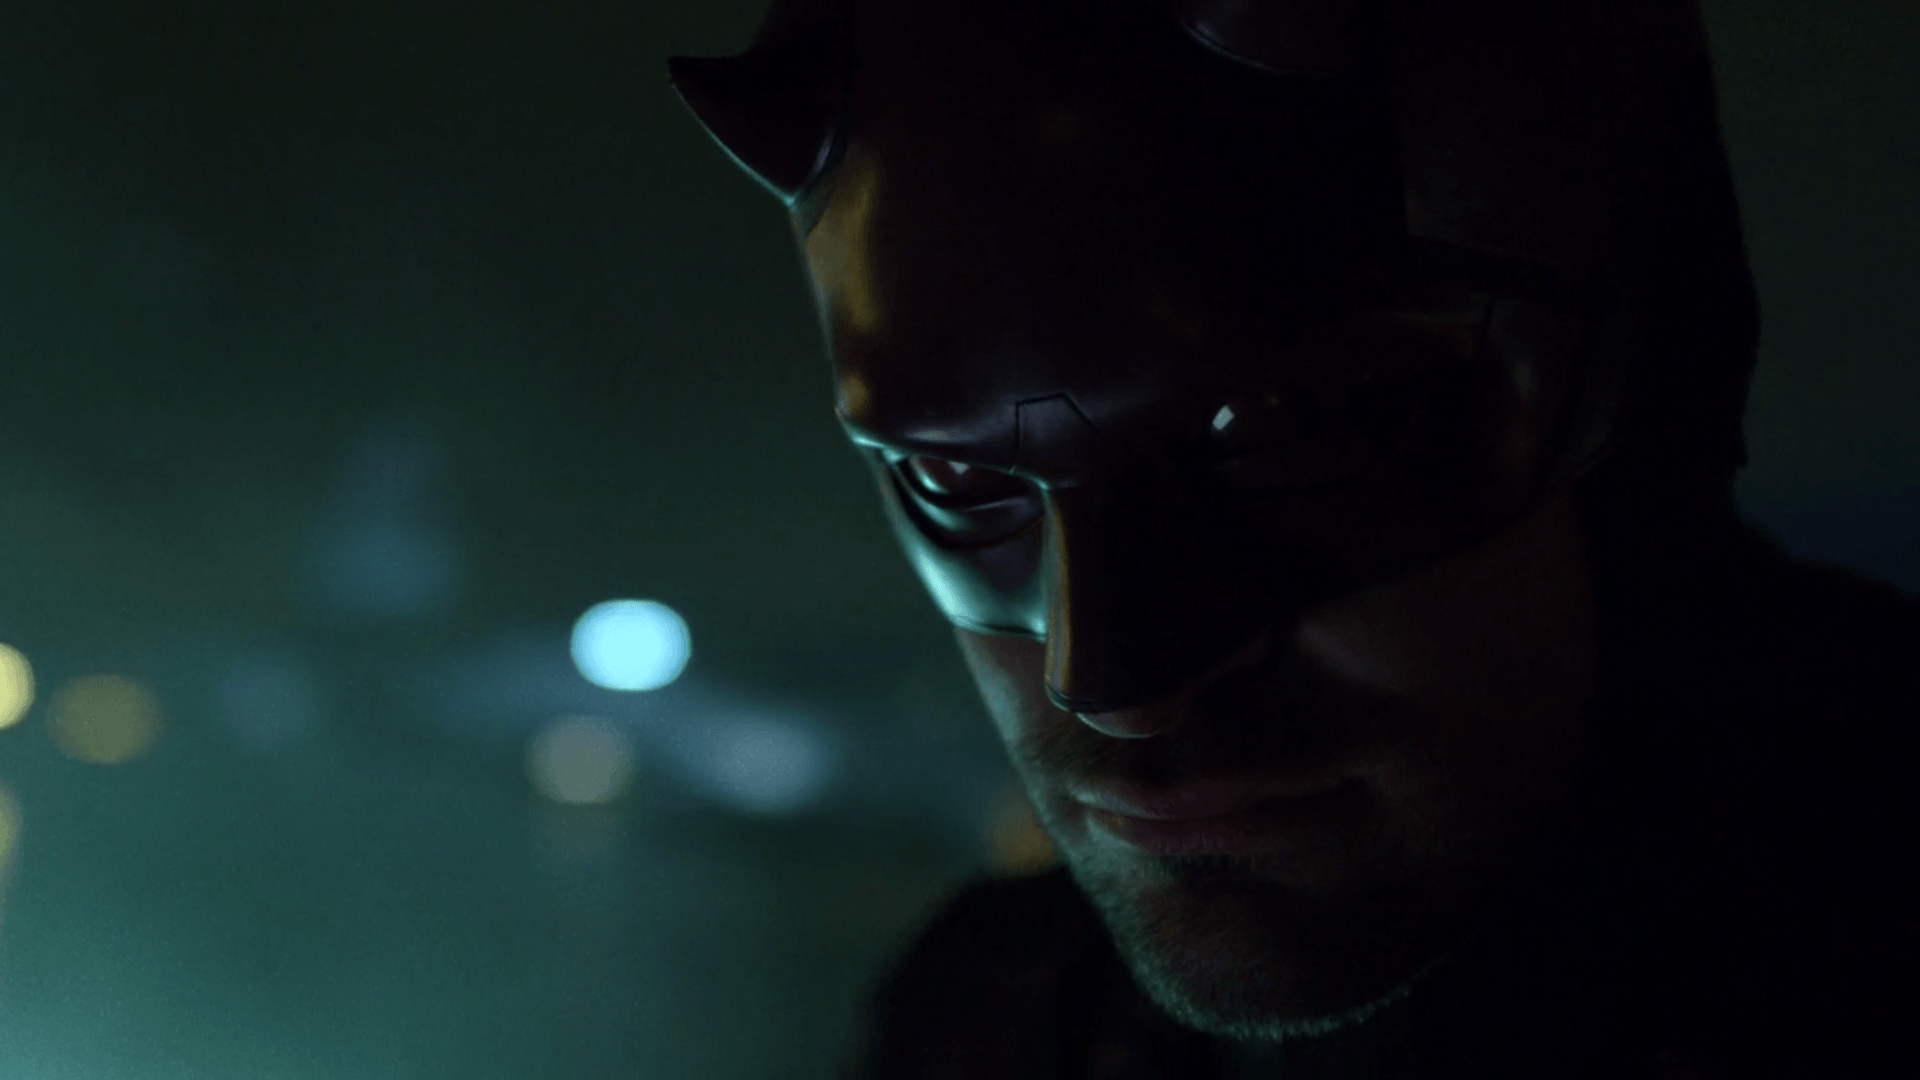 Review: Daredevil season 2 featuring The Punisher and Elektra